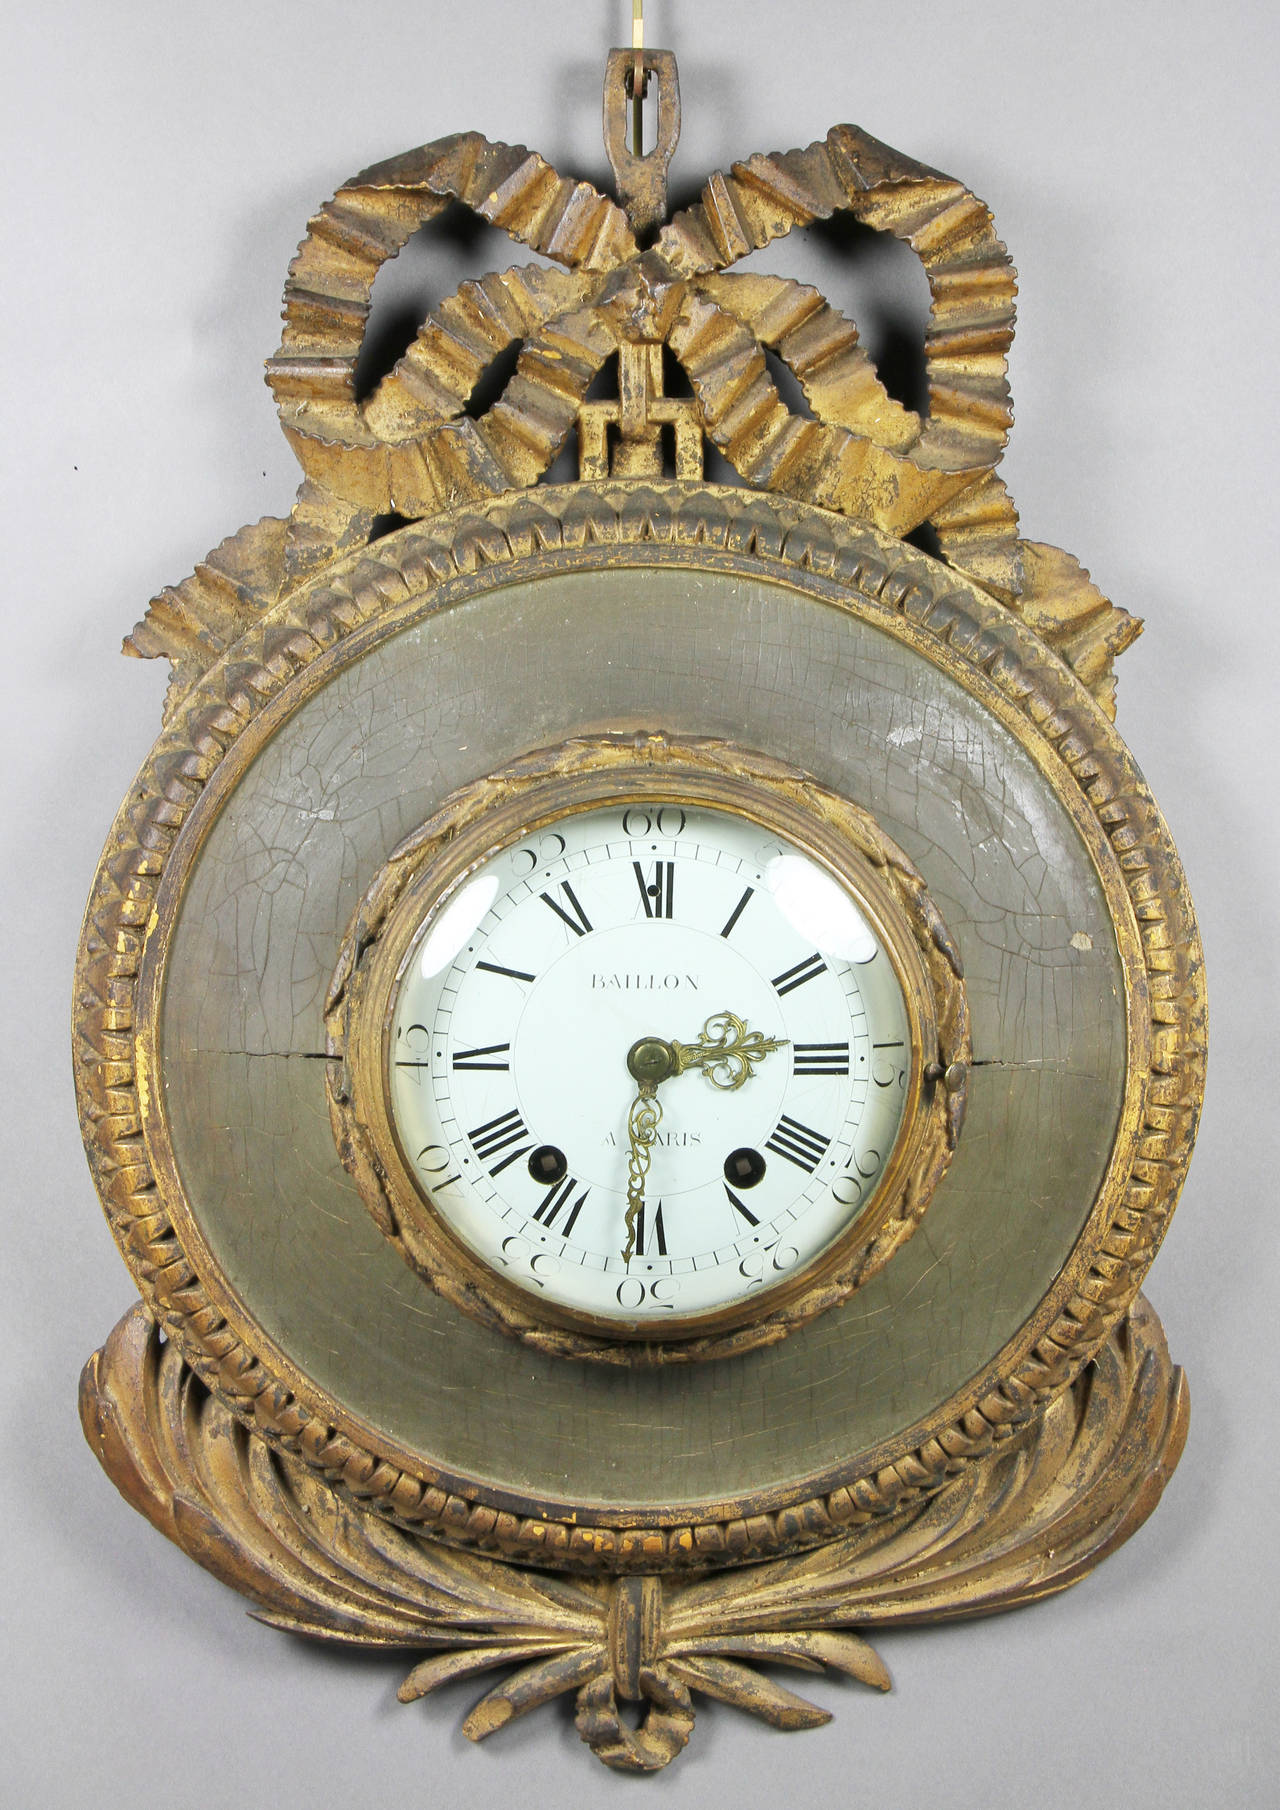 Circular enamelled clock dial signed and by Baillon  Paris , with a hinged domed glass door set in a circular wood case with carved ribbon crest and bundled olive leaves.